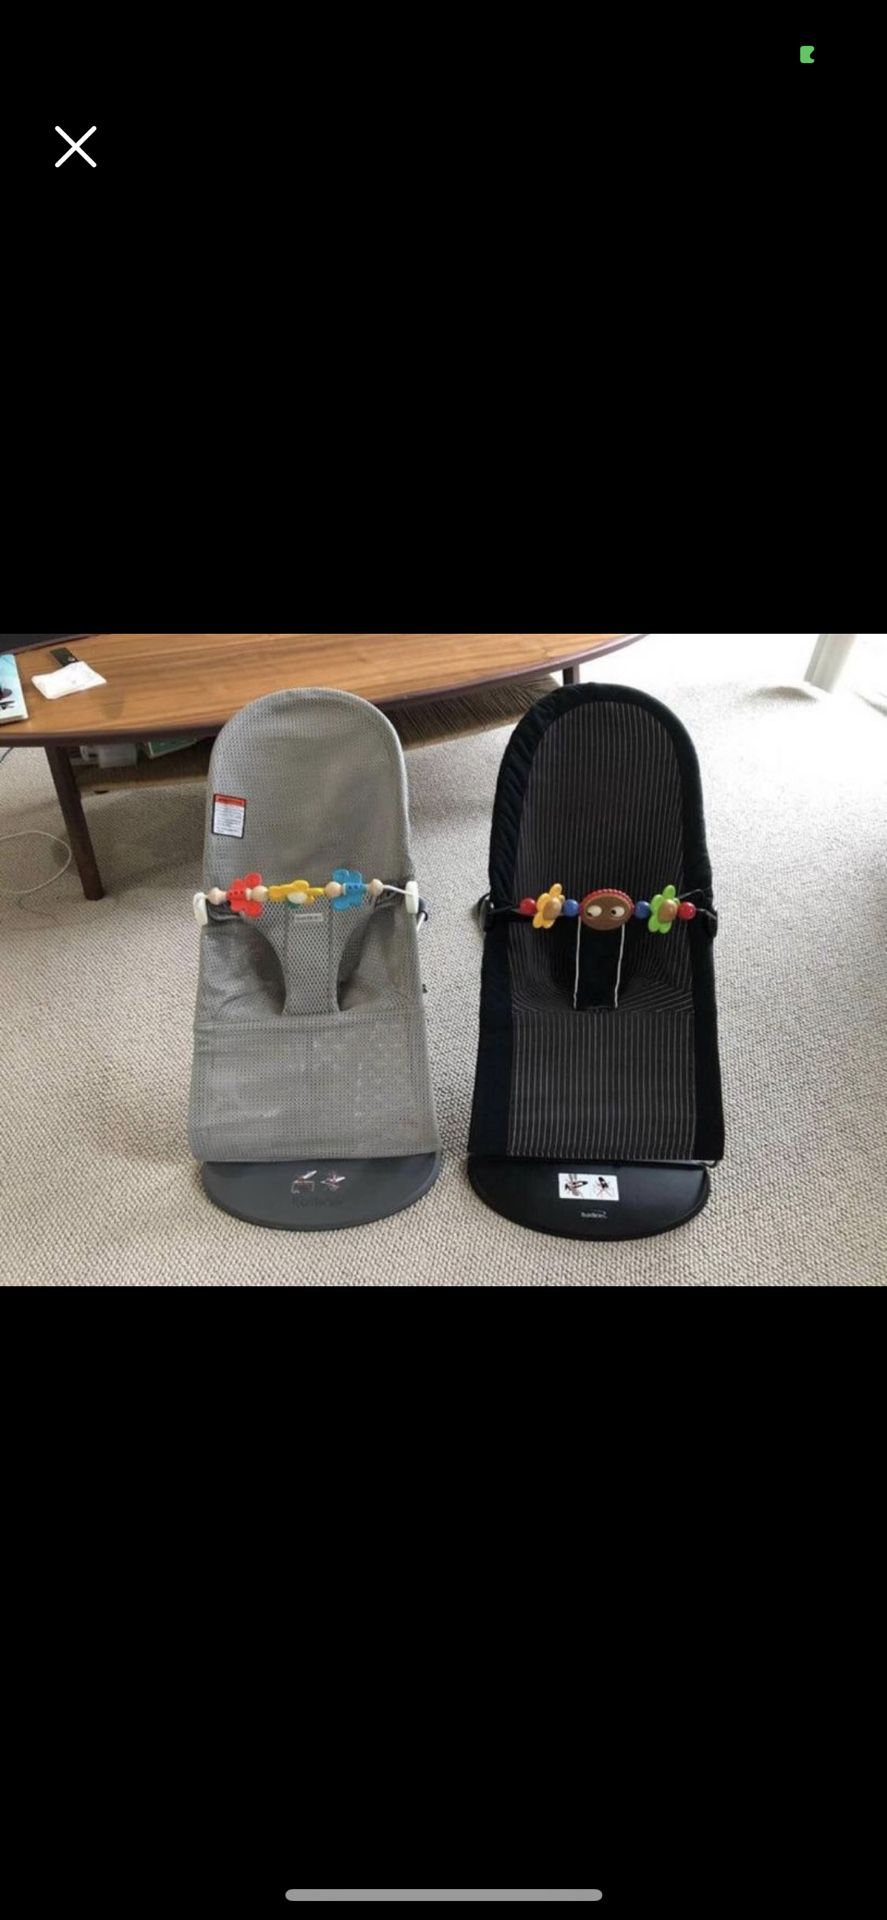 2x BabyBjorn Bouncers (one Toy Bar Included)